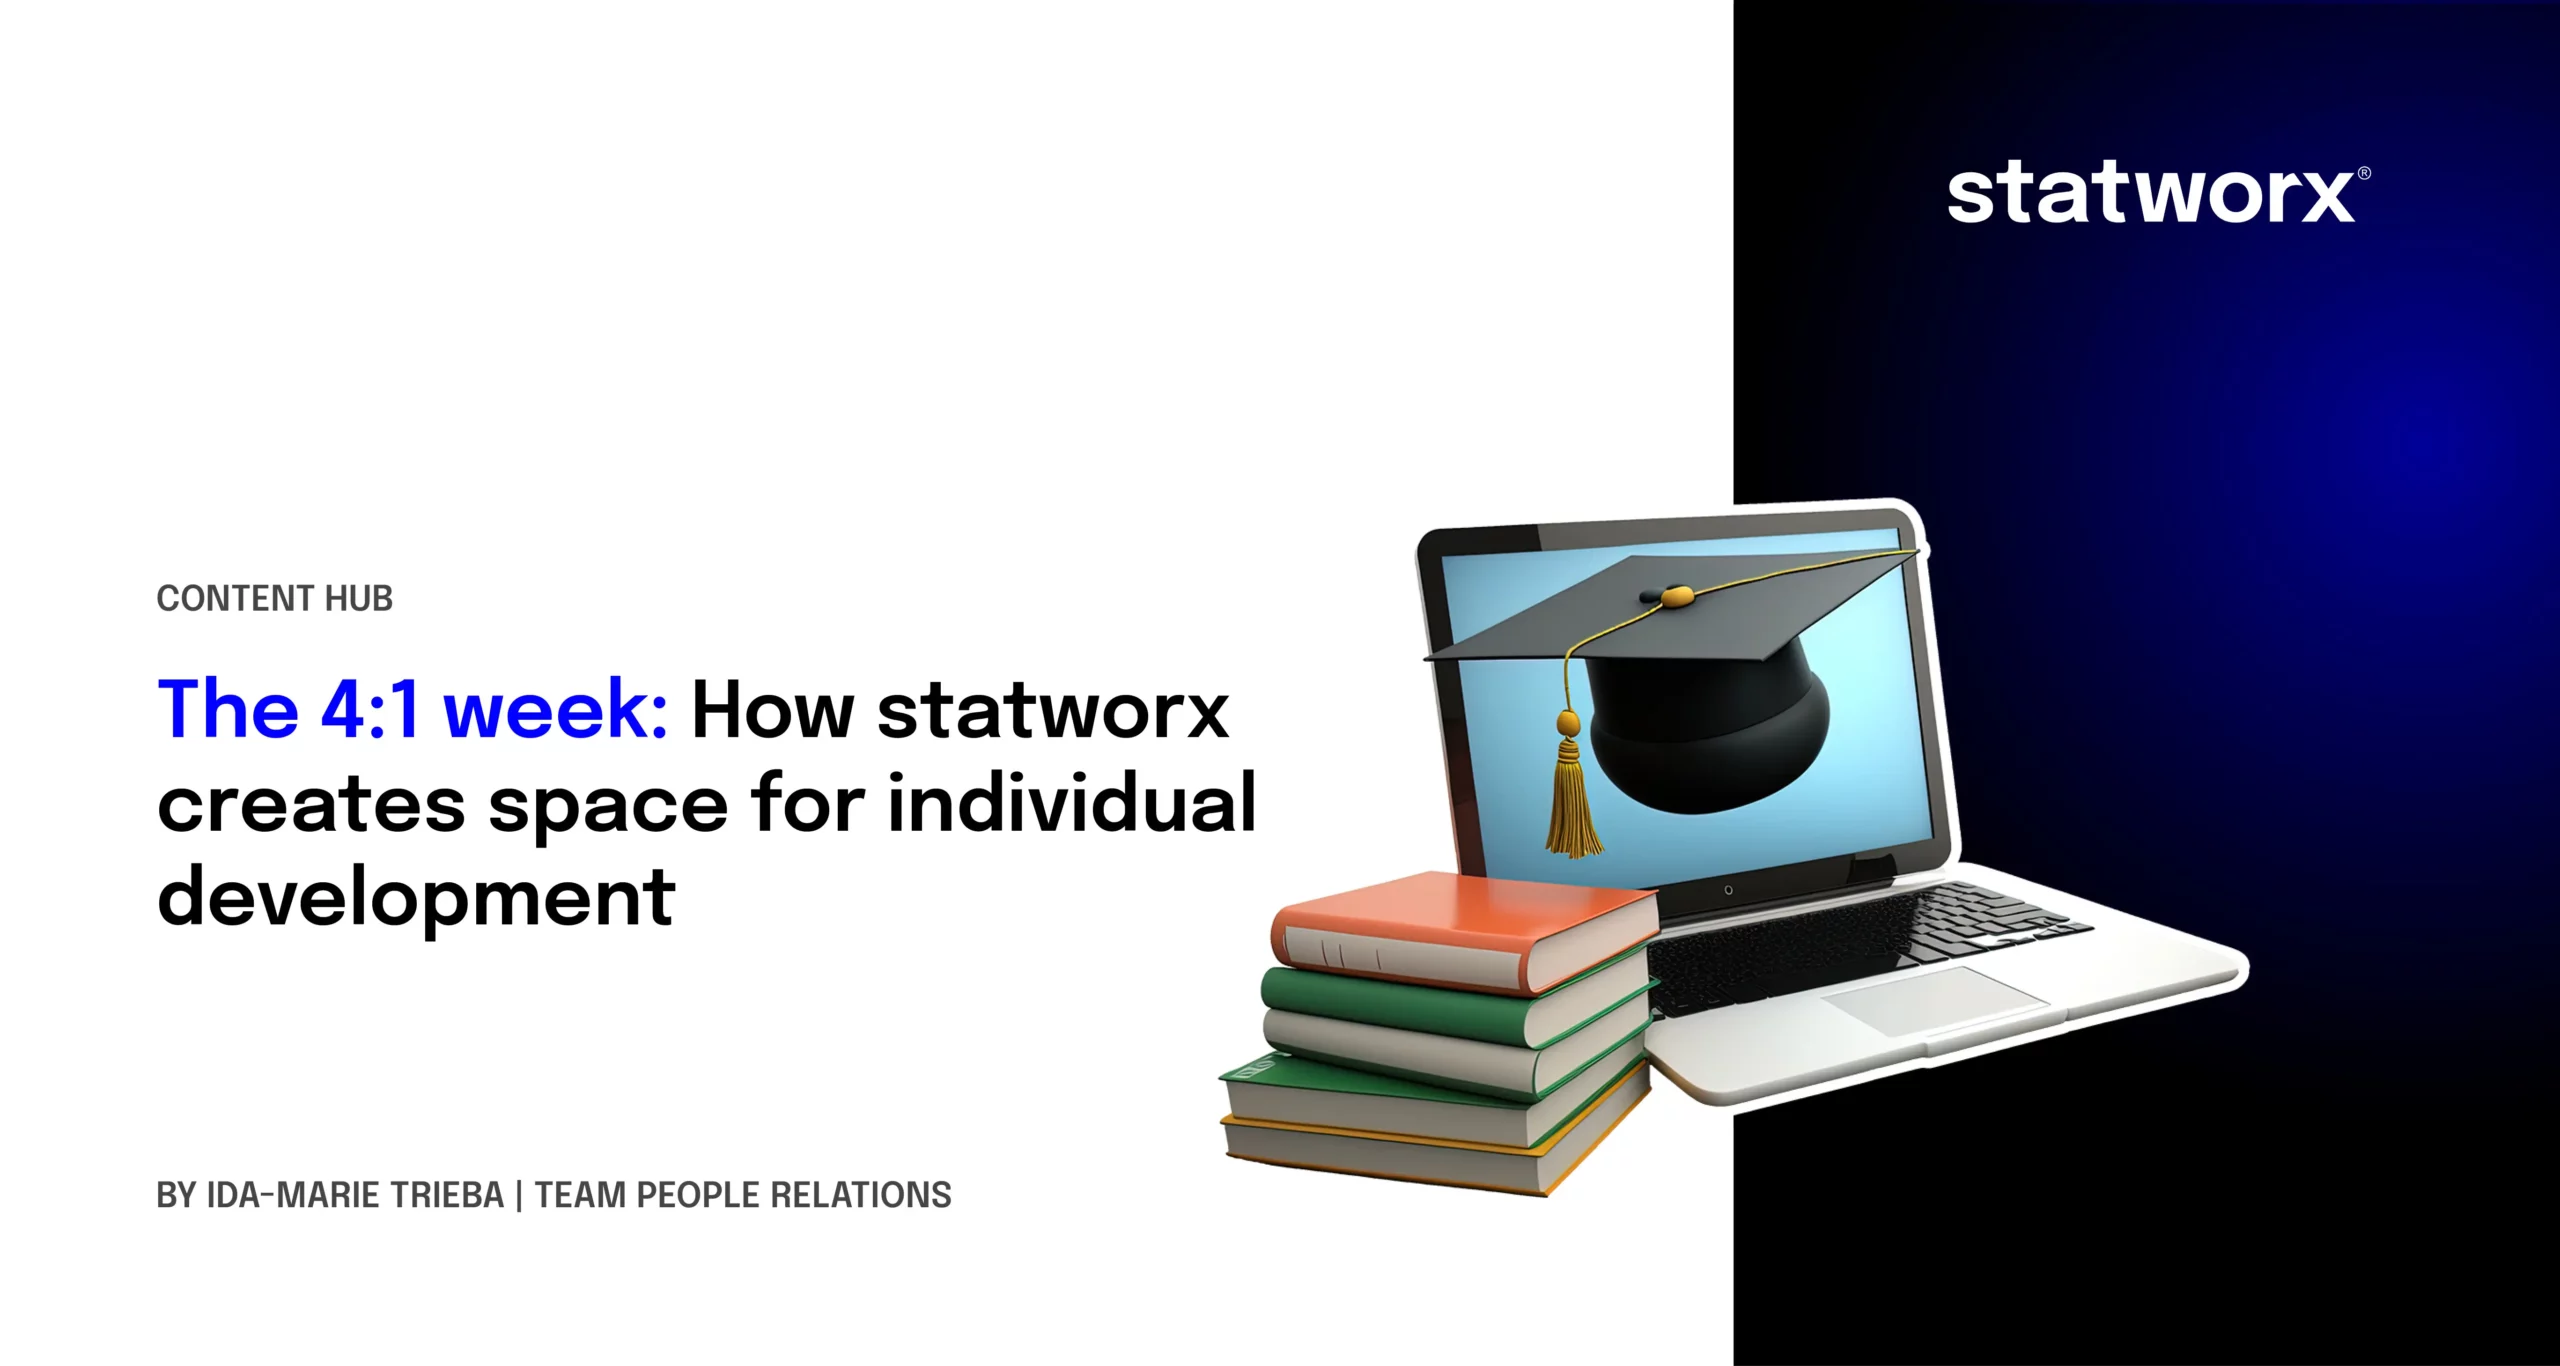 The 4:1 week: How statworx creates space for individual development